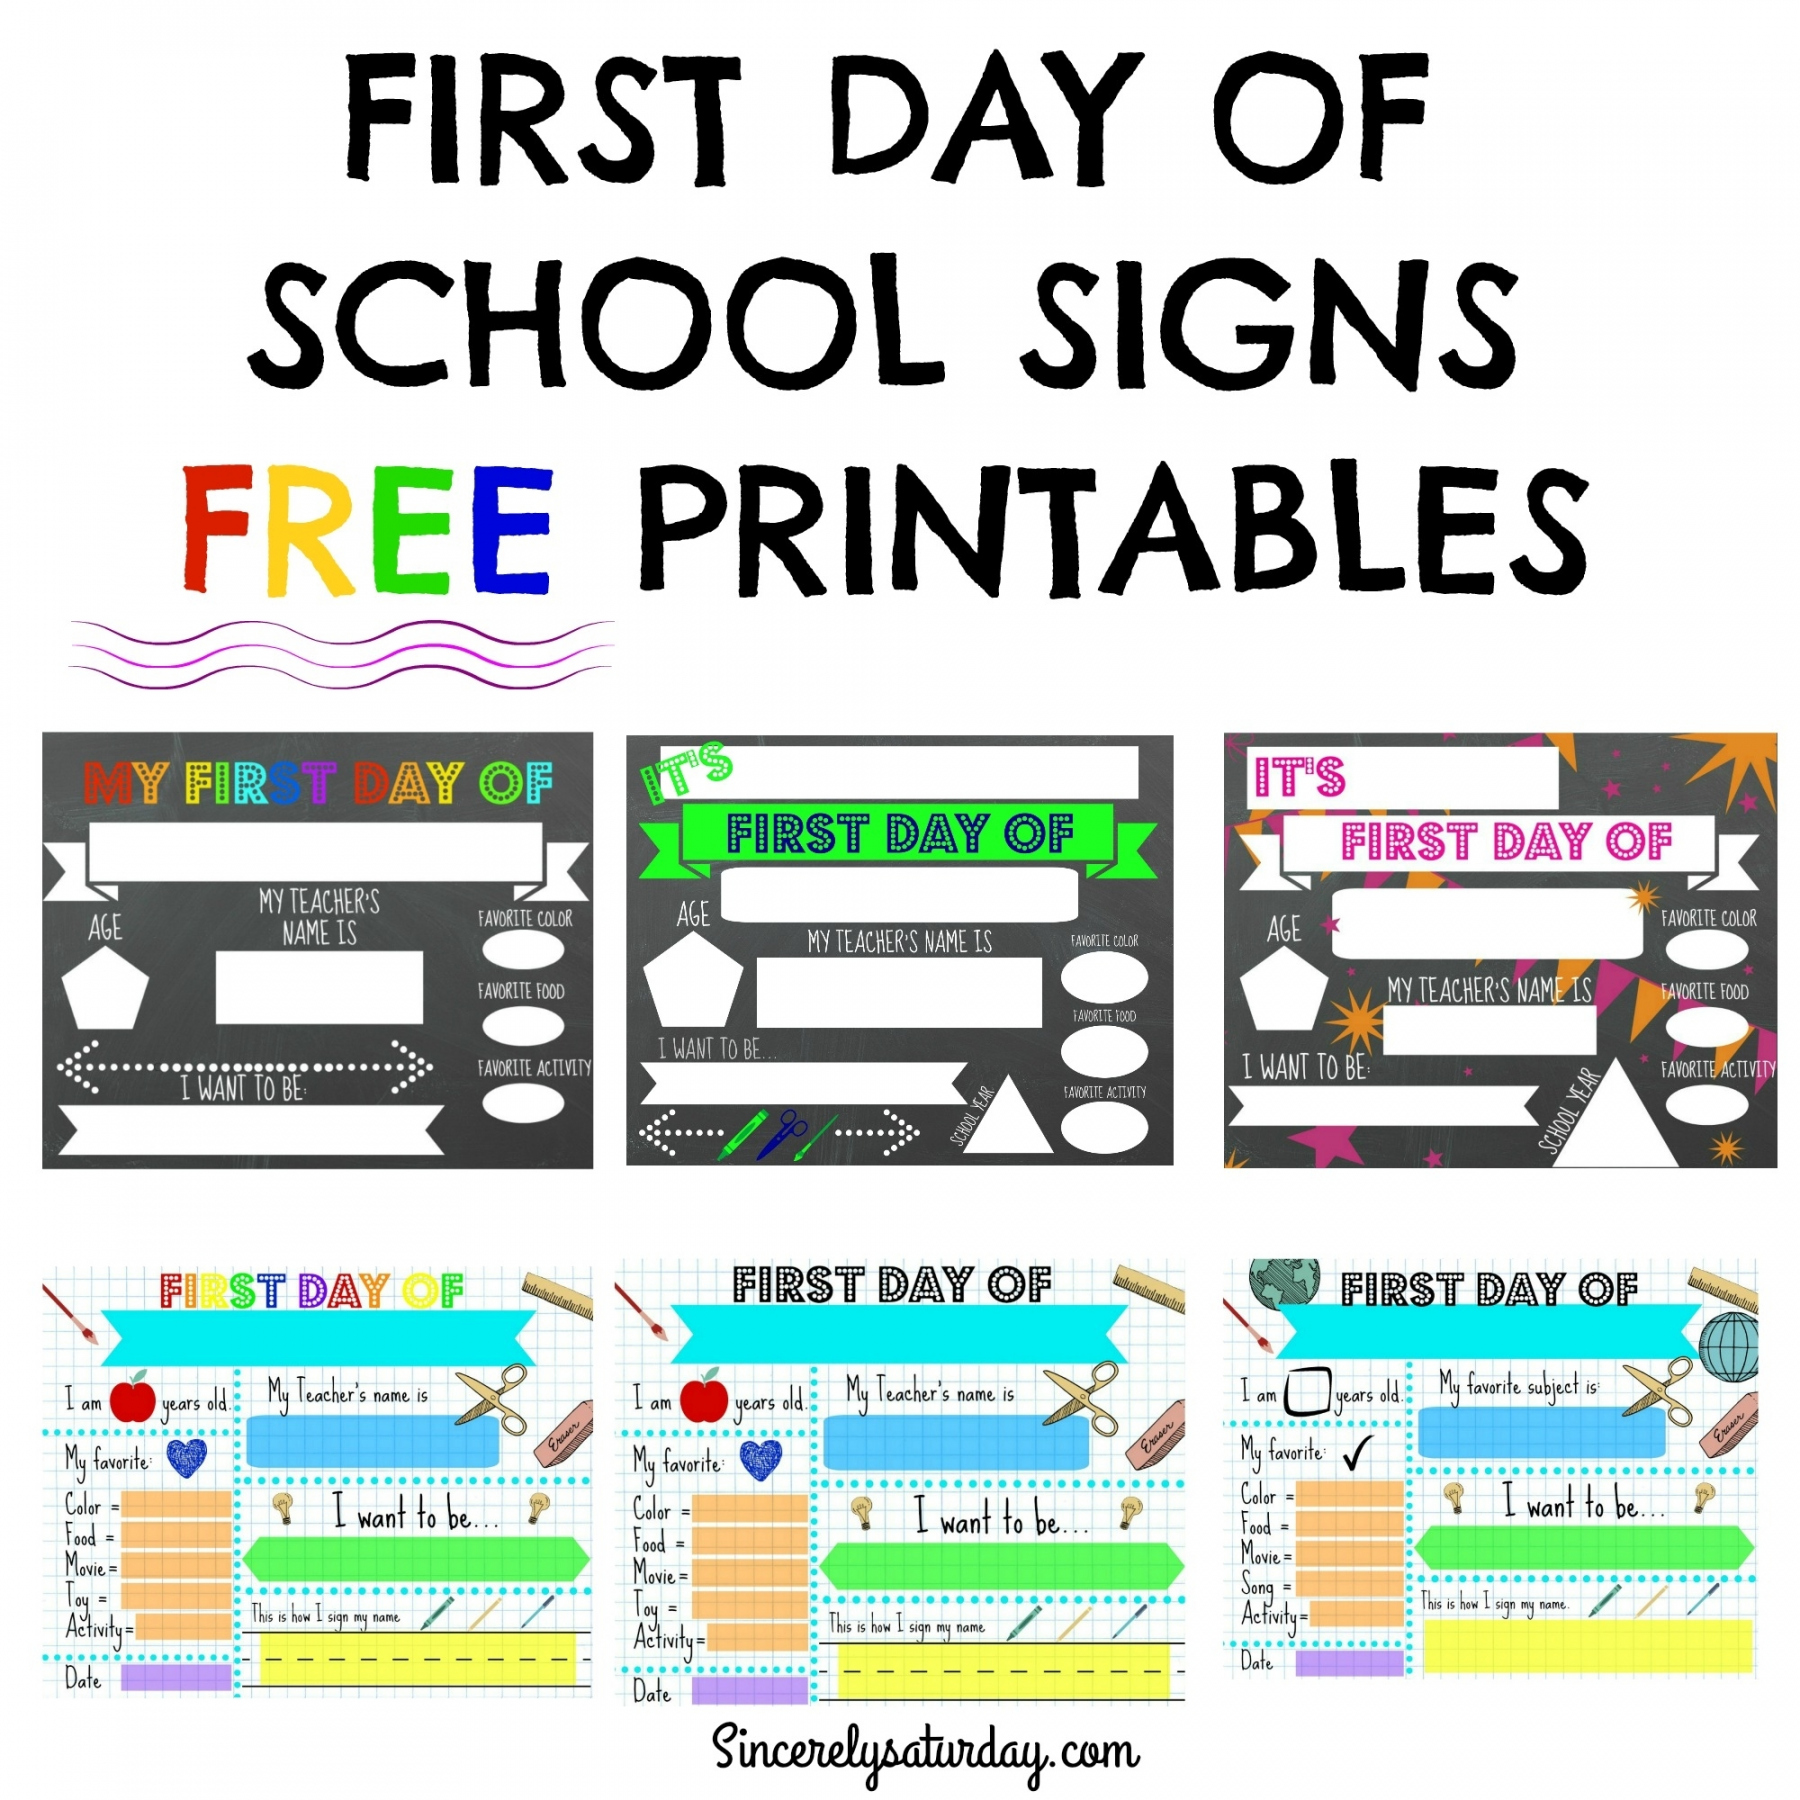 Free First Day of School Printables - Printable - FREE PRINTABLE FIRST DAY OF SCHOOL SIGNS - Sincerely Saturday